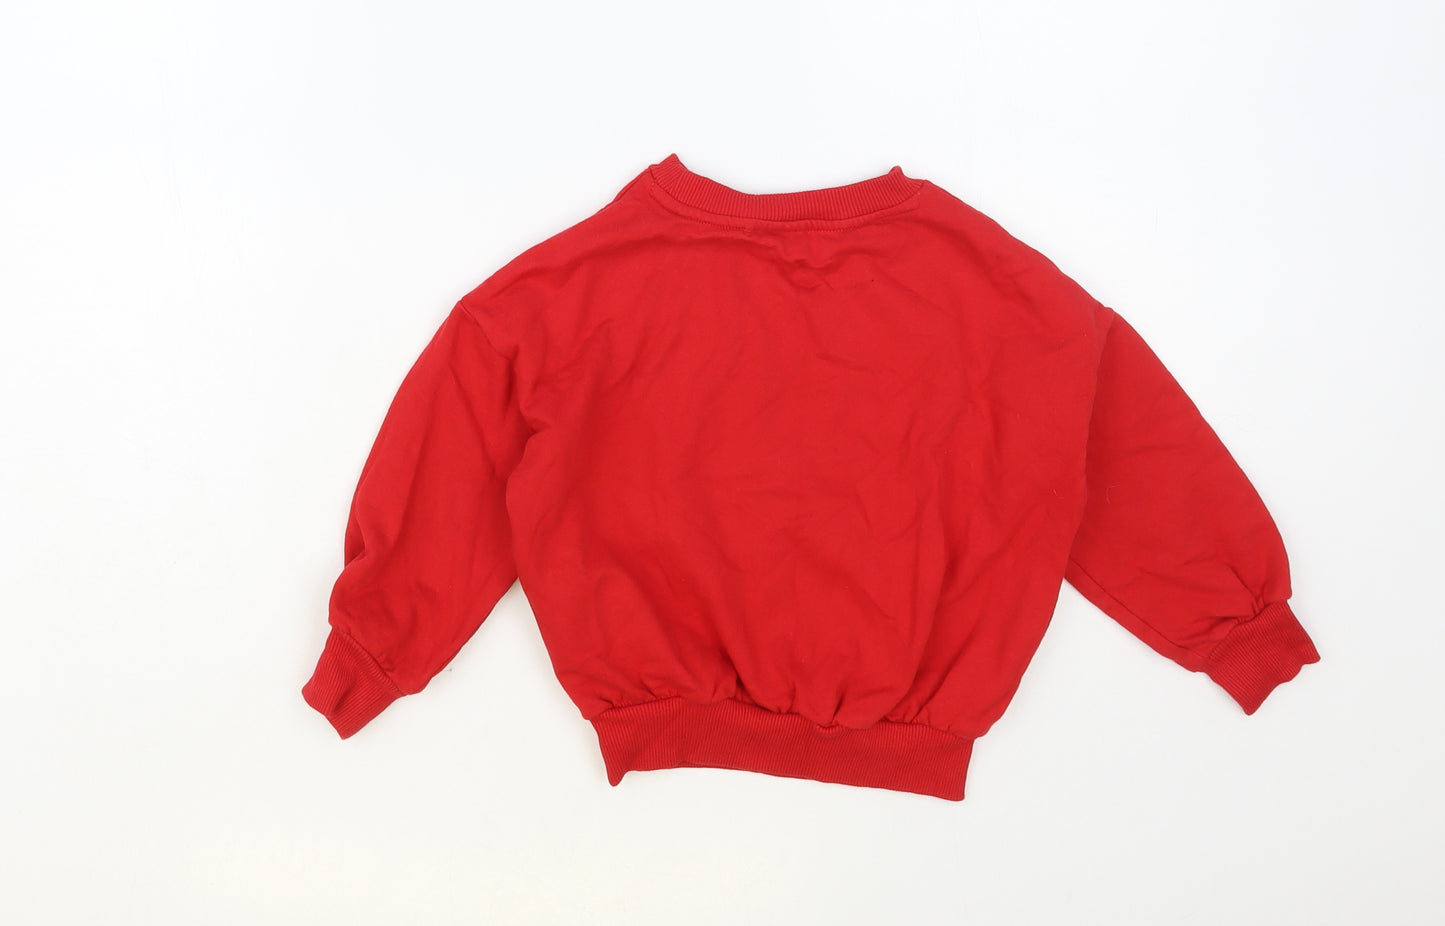 NEXT Boys Red Cotton Pullover Sweatshirt Size 5 Years Pullover - It's Coming Ho-Ho Home